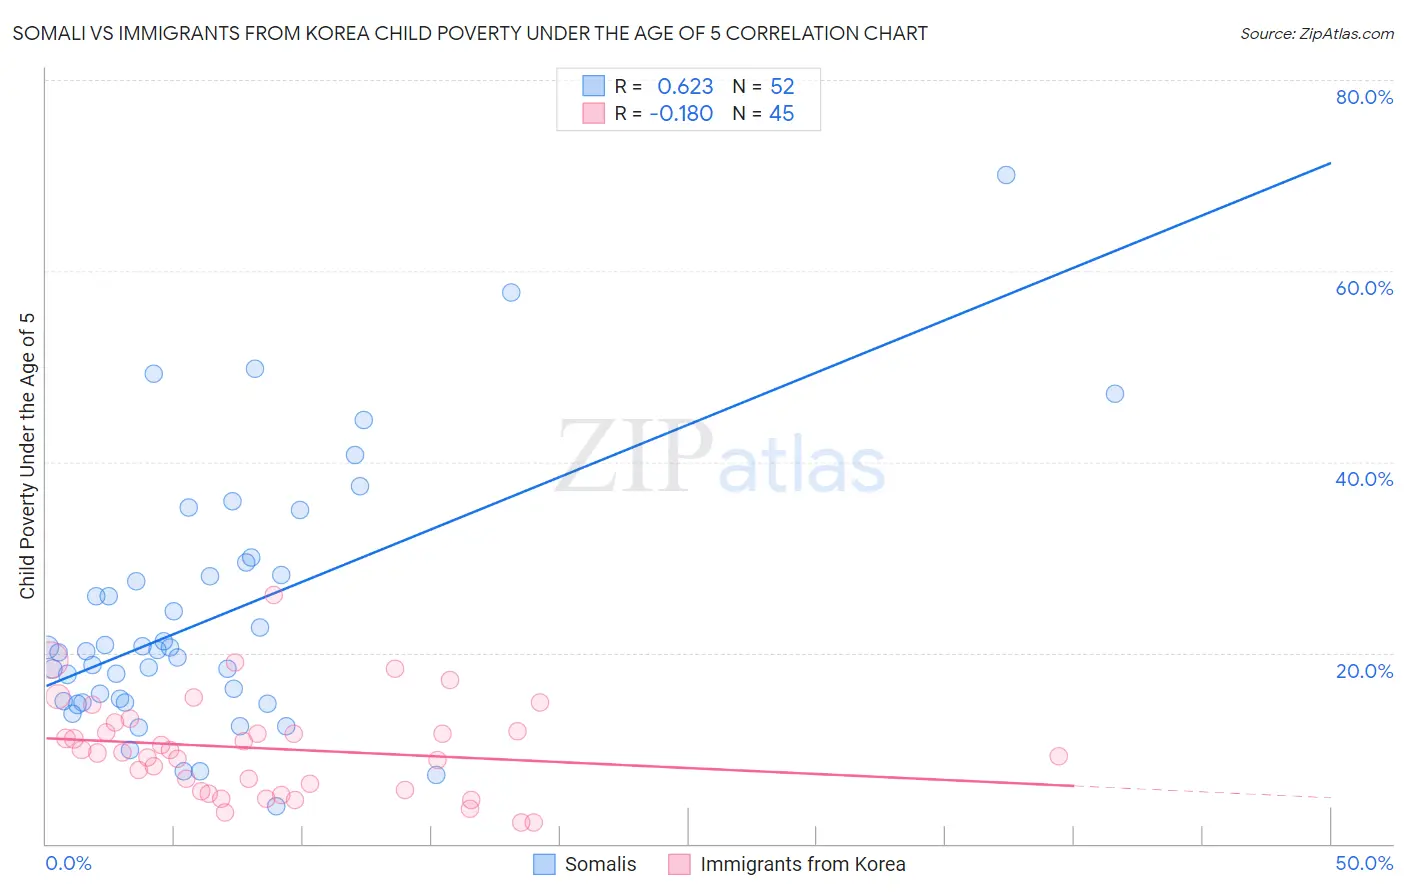 Somali vs Immigrants from Korea Child Poverty Under the Age of 5